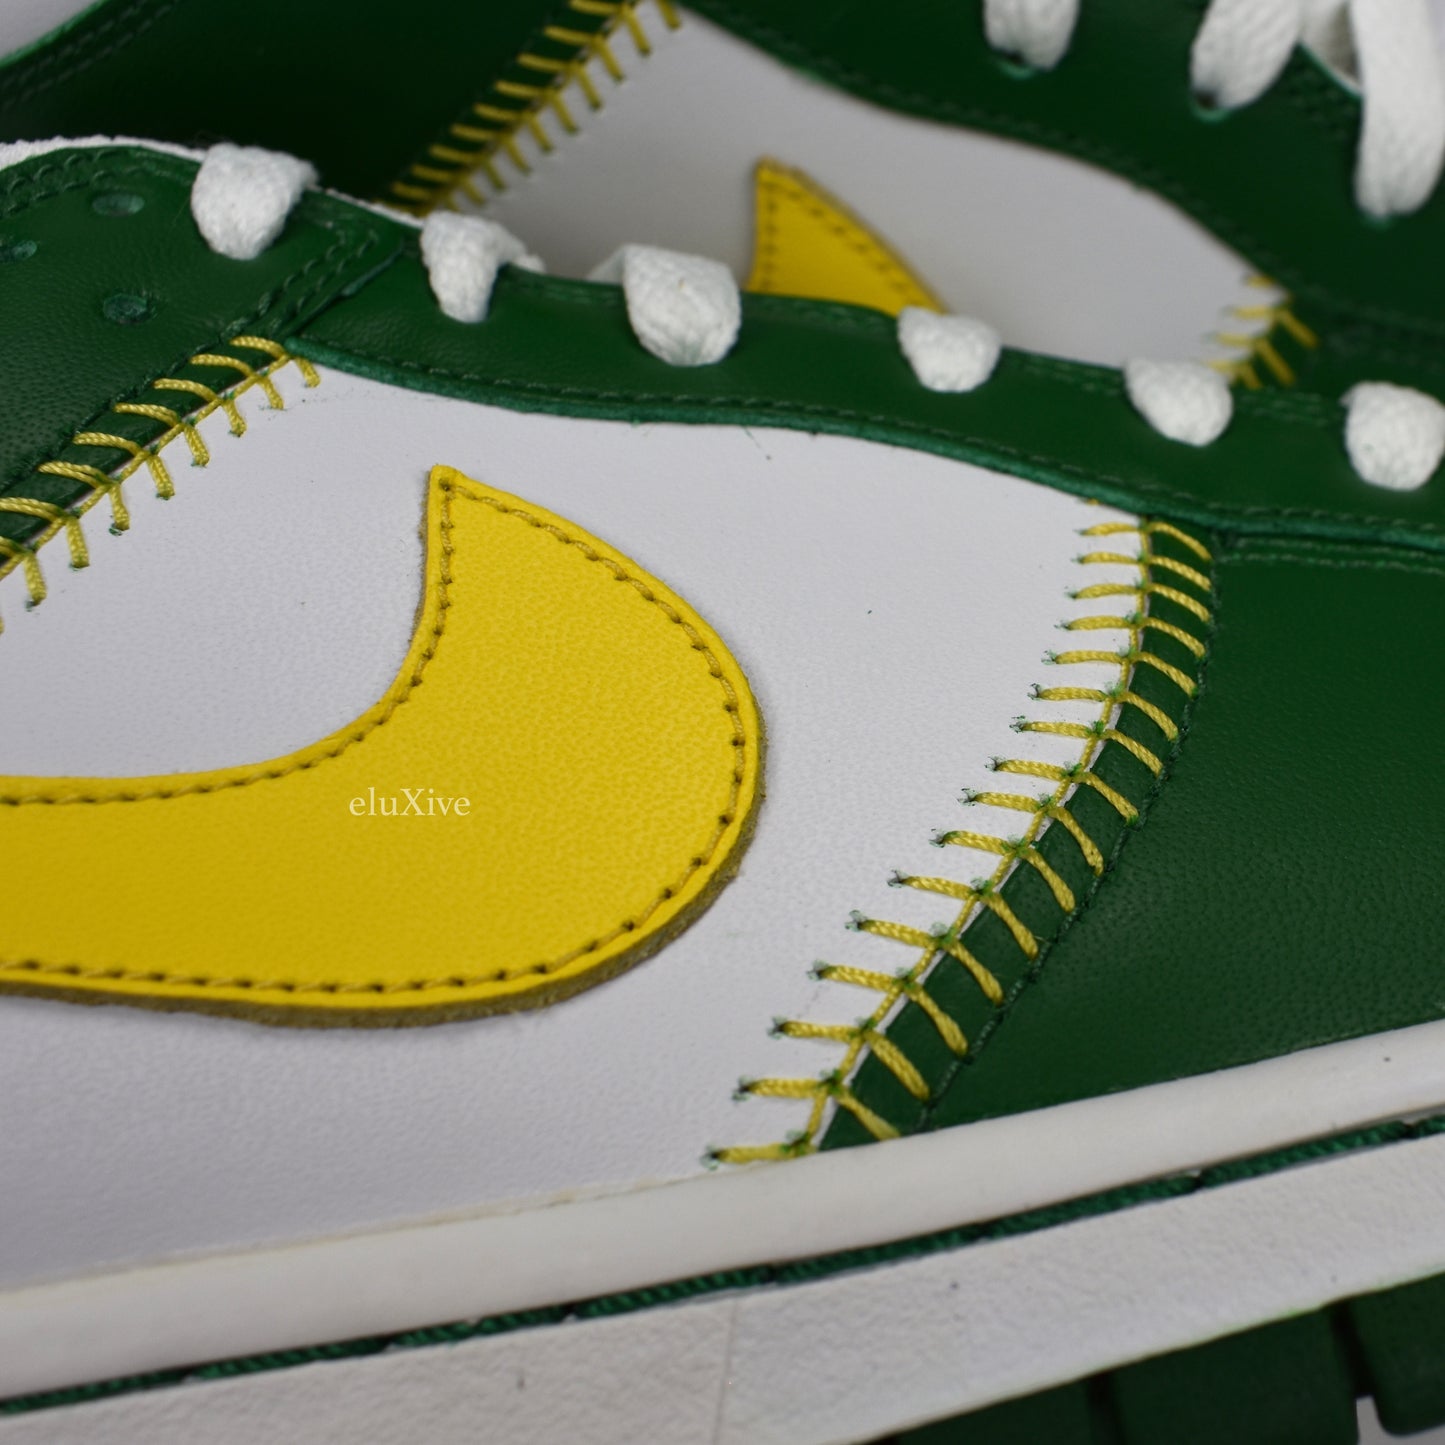 Nike - Dunk Low Baseball Pack 'Oakland A's'